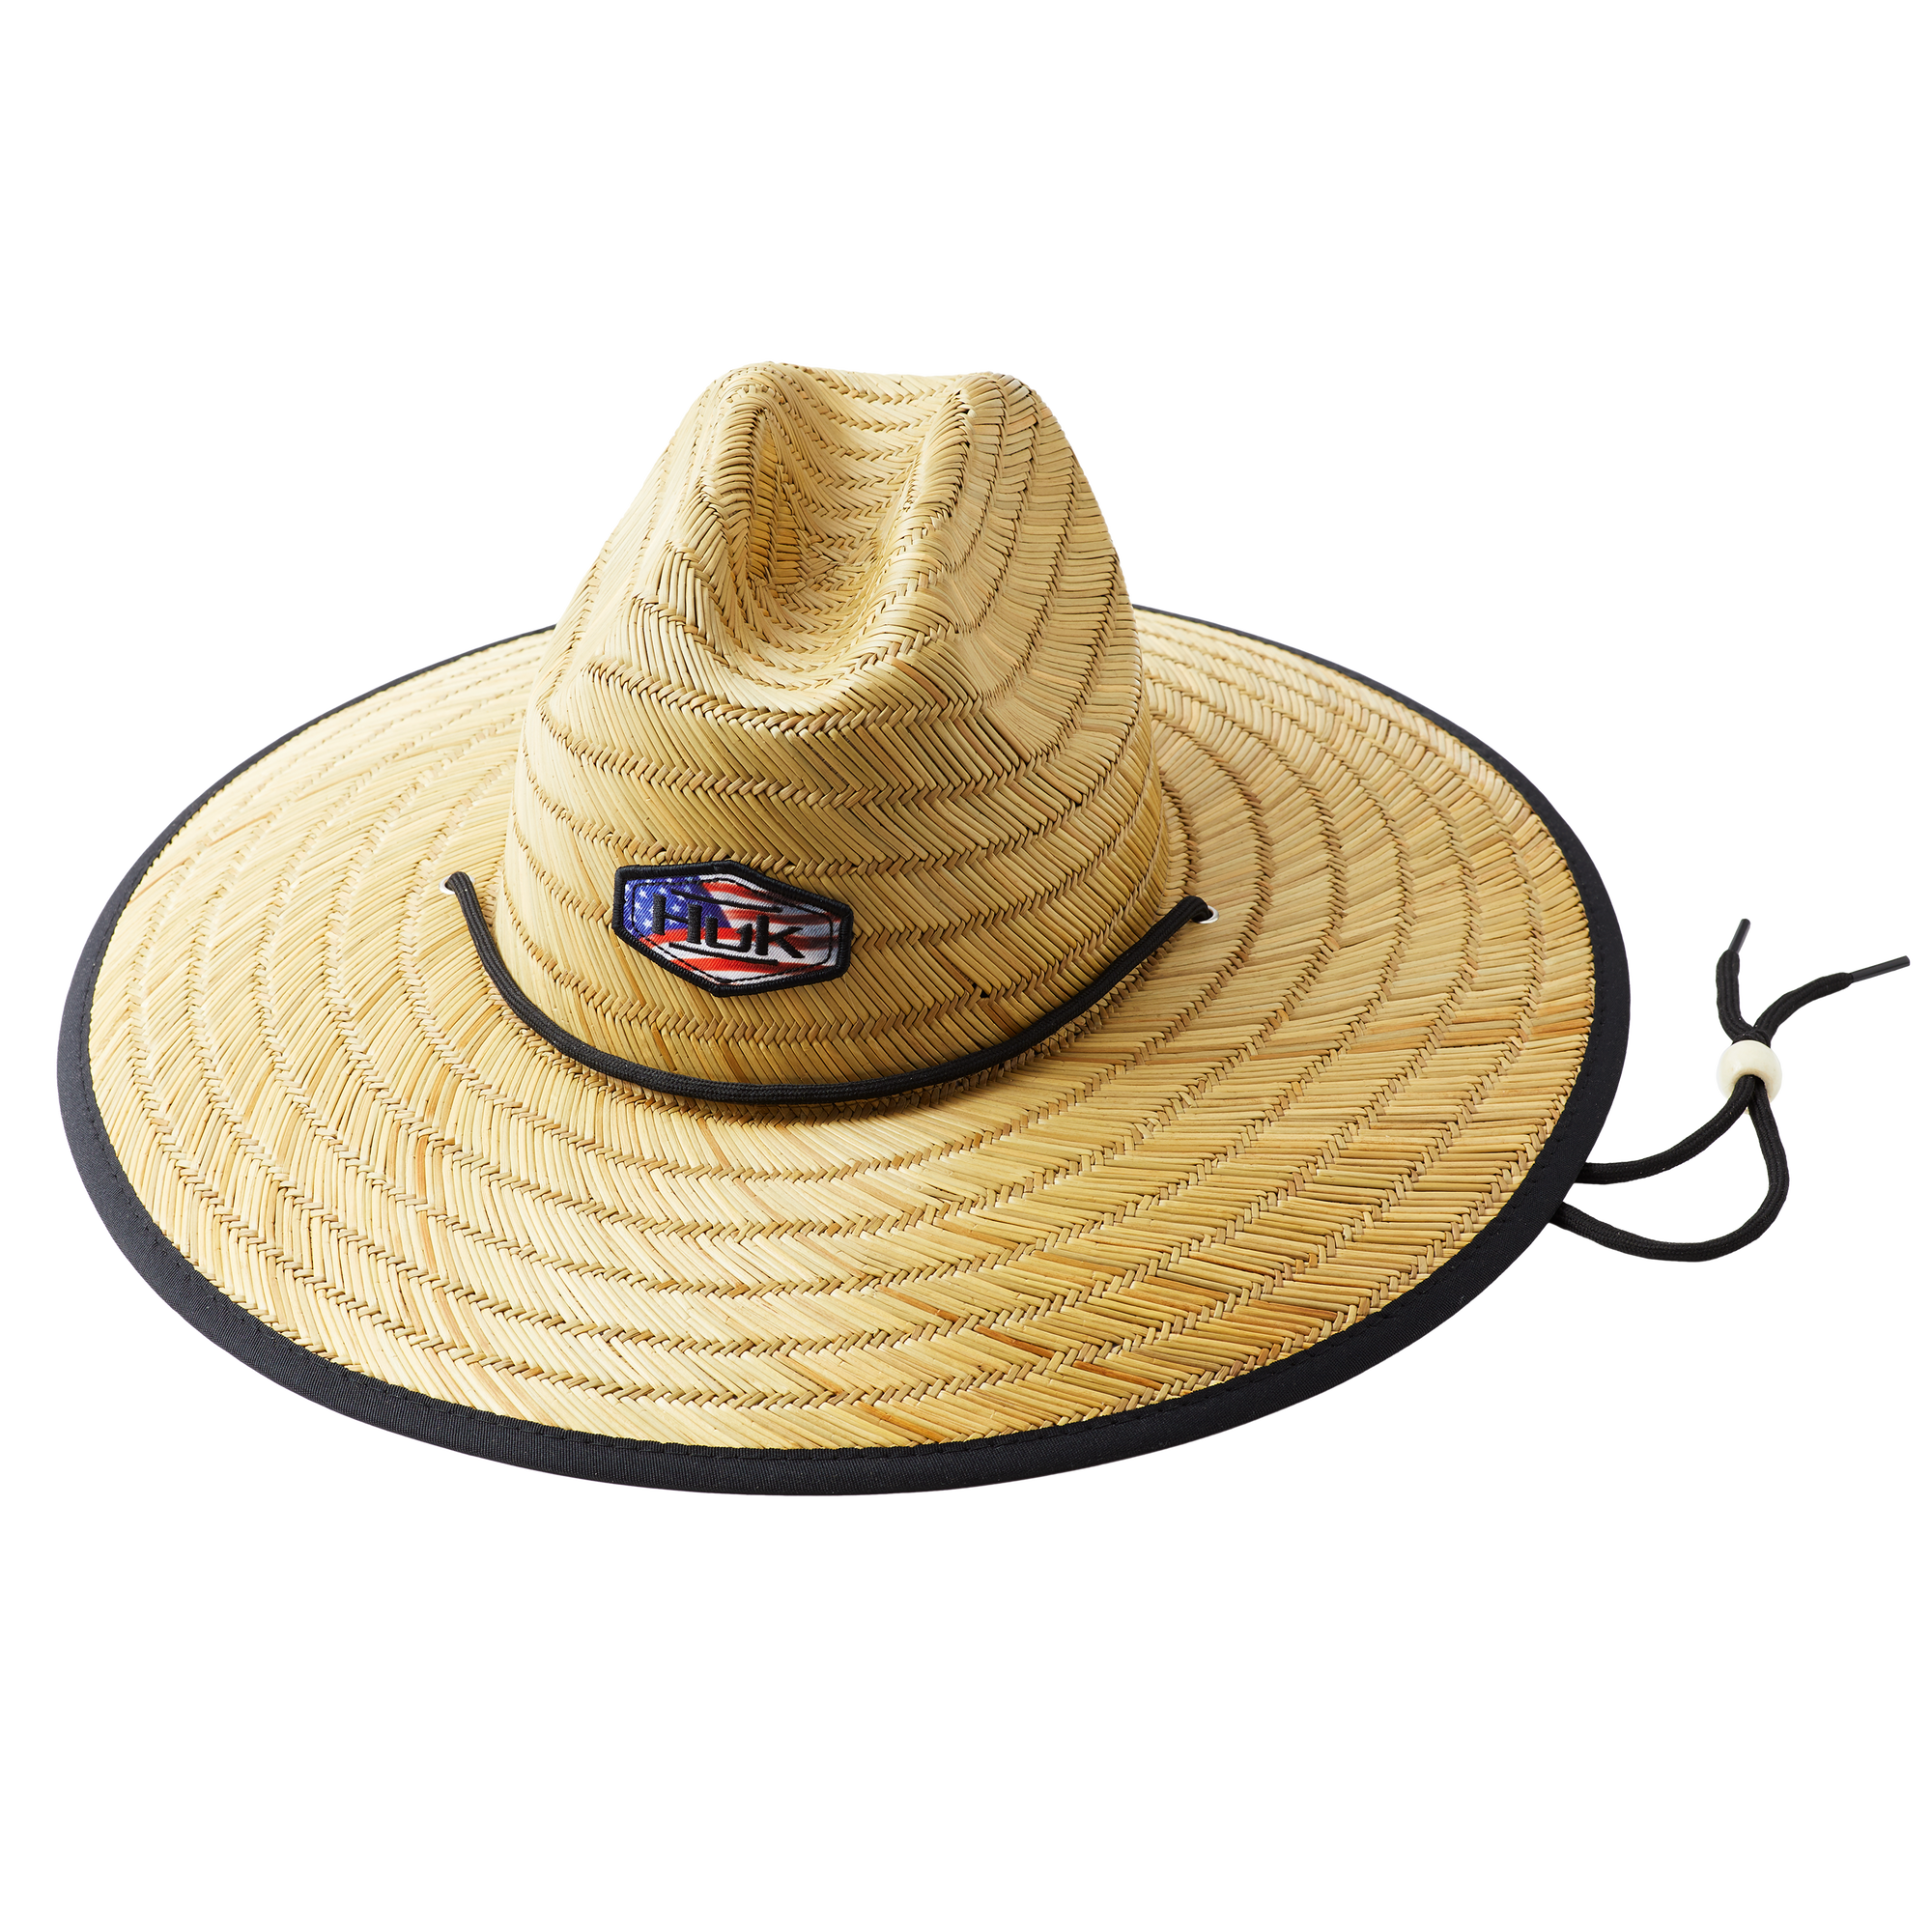 huk straw hat womens for Sale,Up To OFF 78%